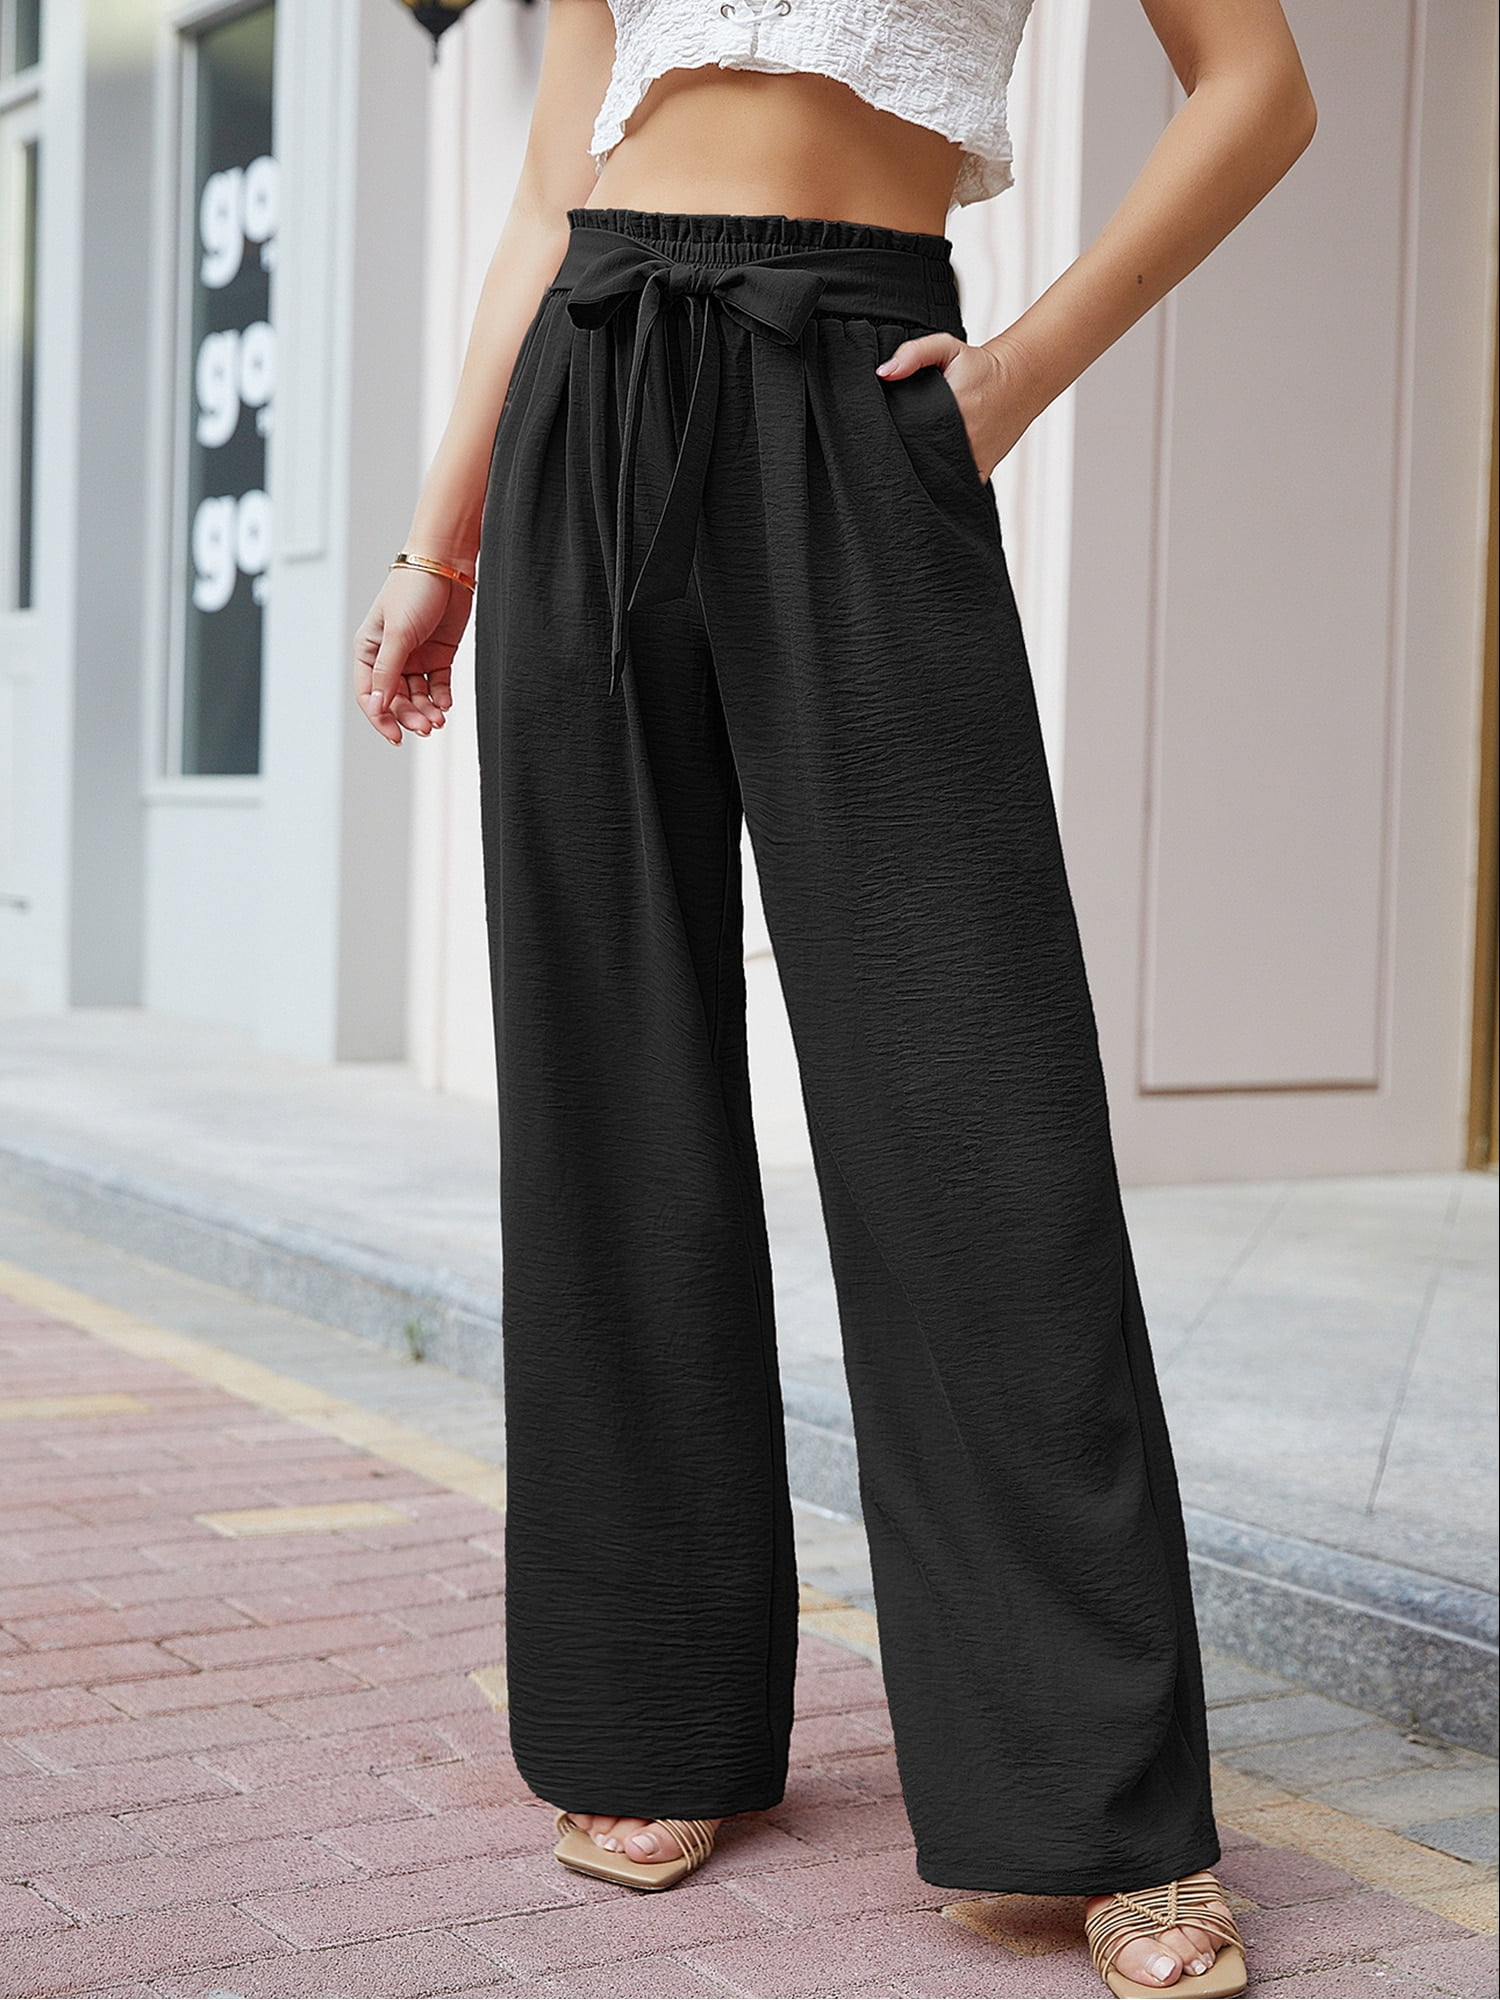 Chiclily Belted Wide Leg Pants for Women High Waisted Business Casual  Palazzo Pants Work Trousers Loose Flowy Summer Beach Lounge Pants with  Pockets, US Size Small in Black 